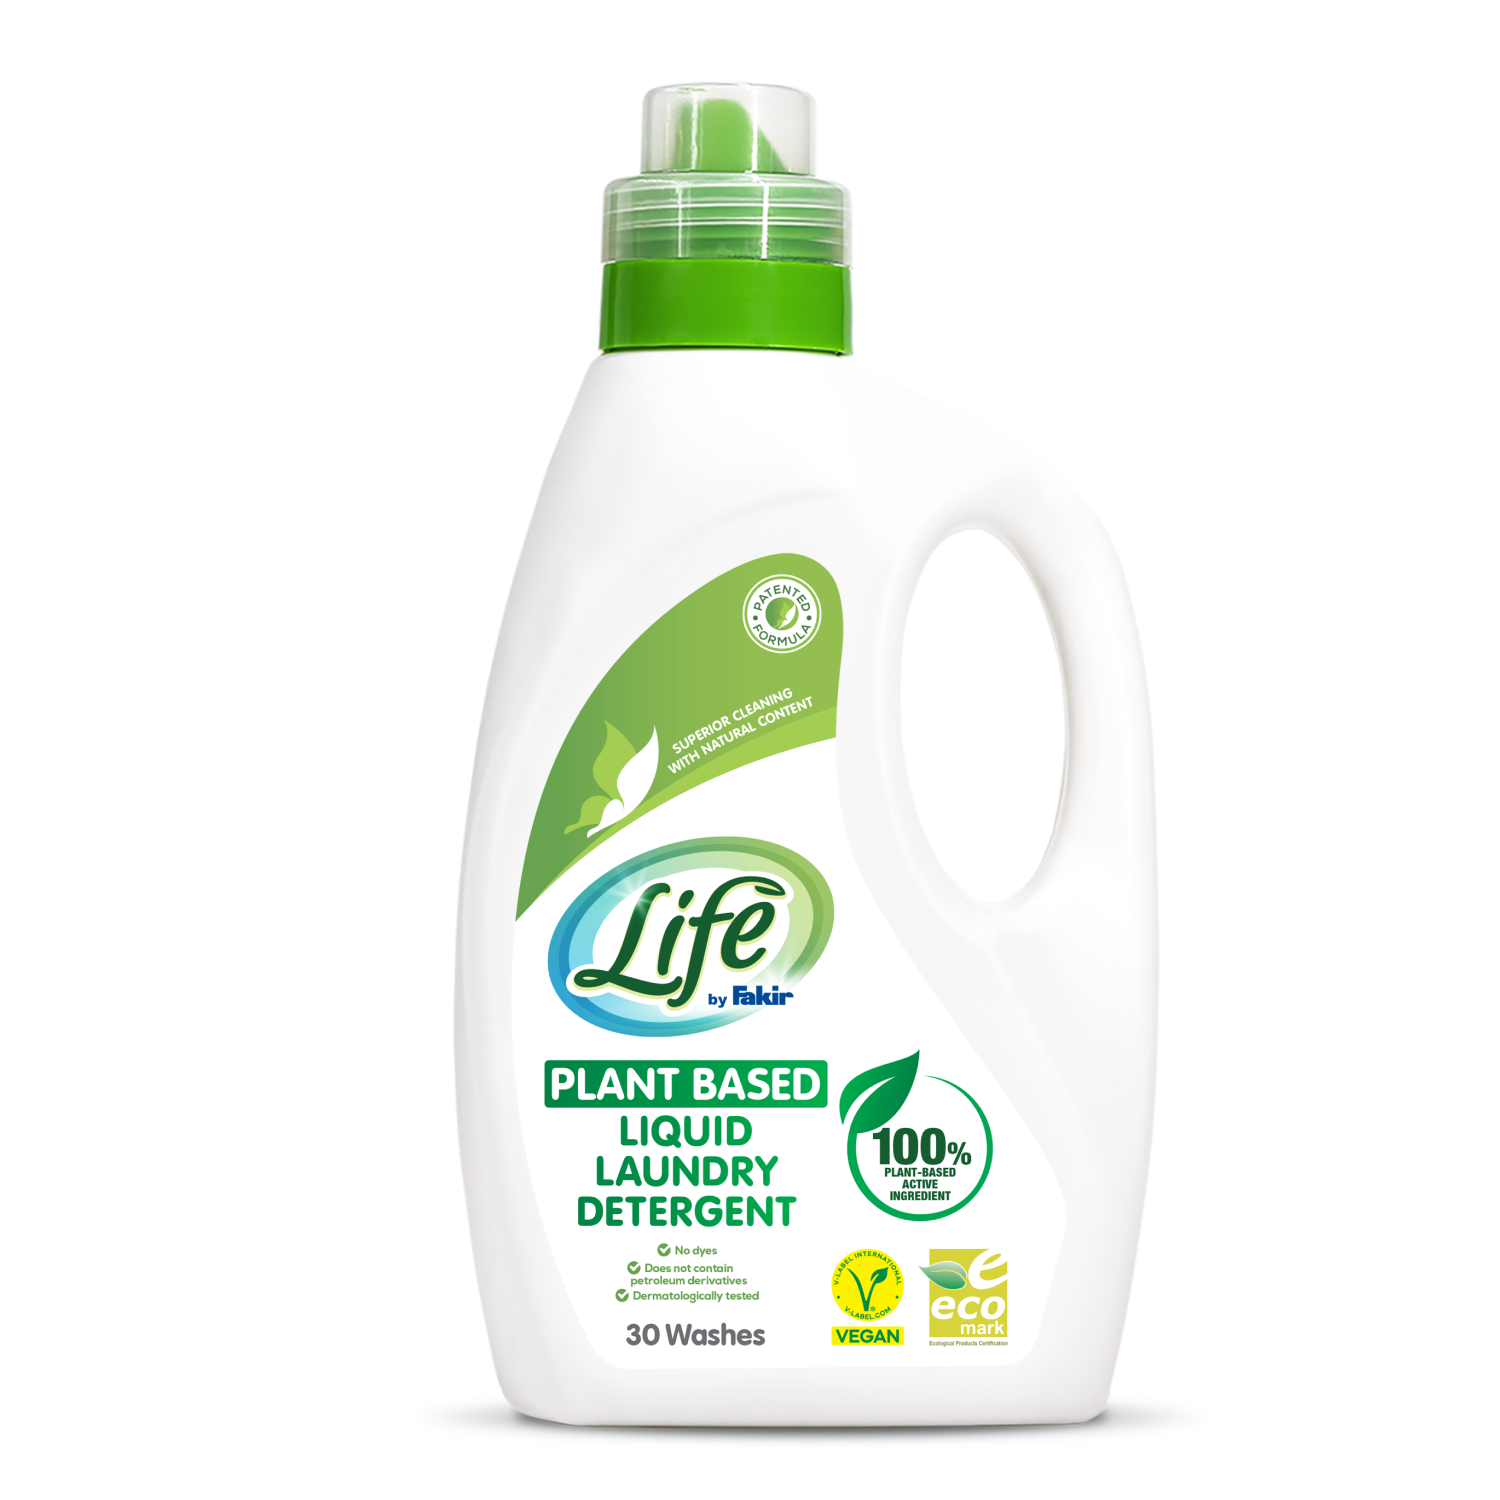 Life By Fakir 100 Herbal Based Liquid Laundry Detergent (1)